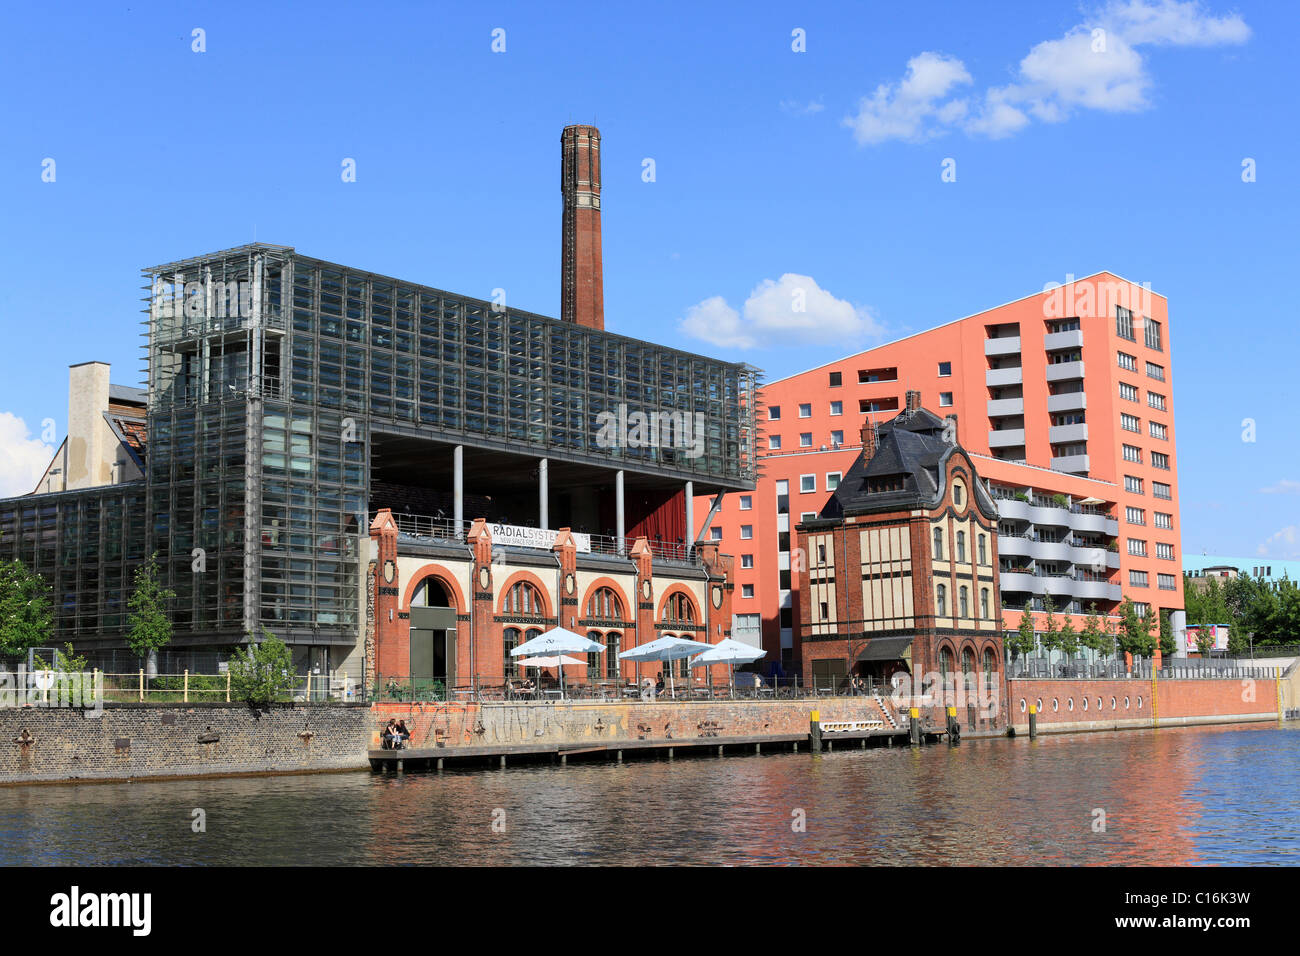 Radialsystem V, centre for creative events, and the Ibis Hotel on the banks of the Spree River, Berlin, Germany, Europe Stock Photo